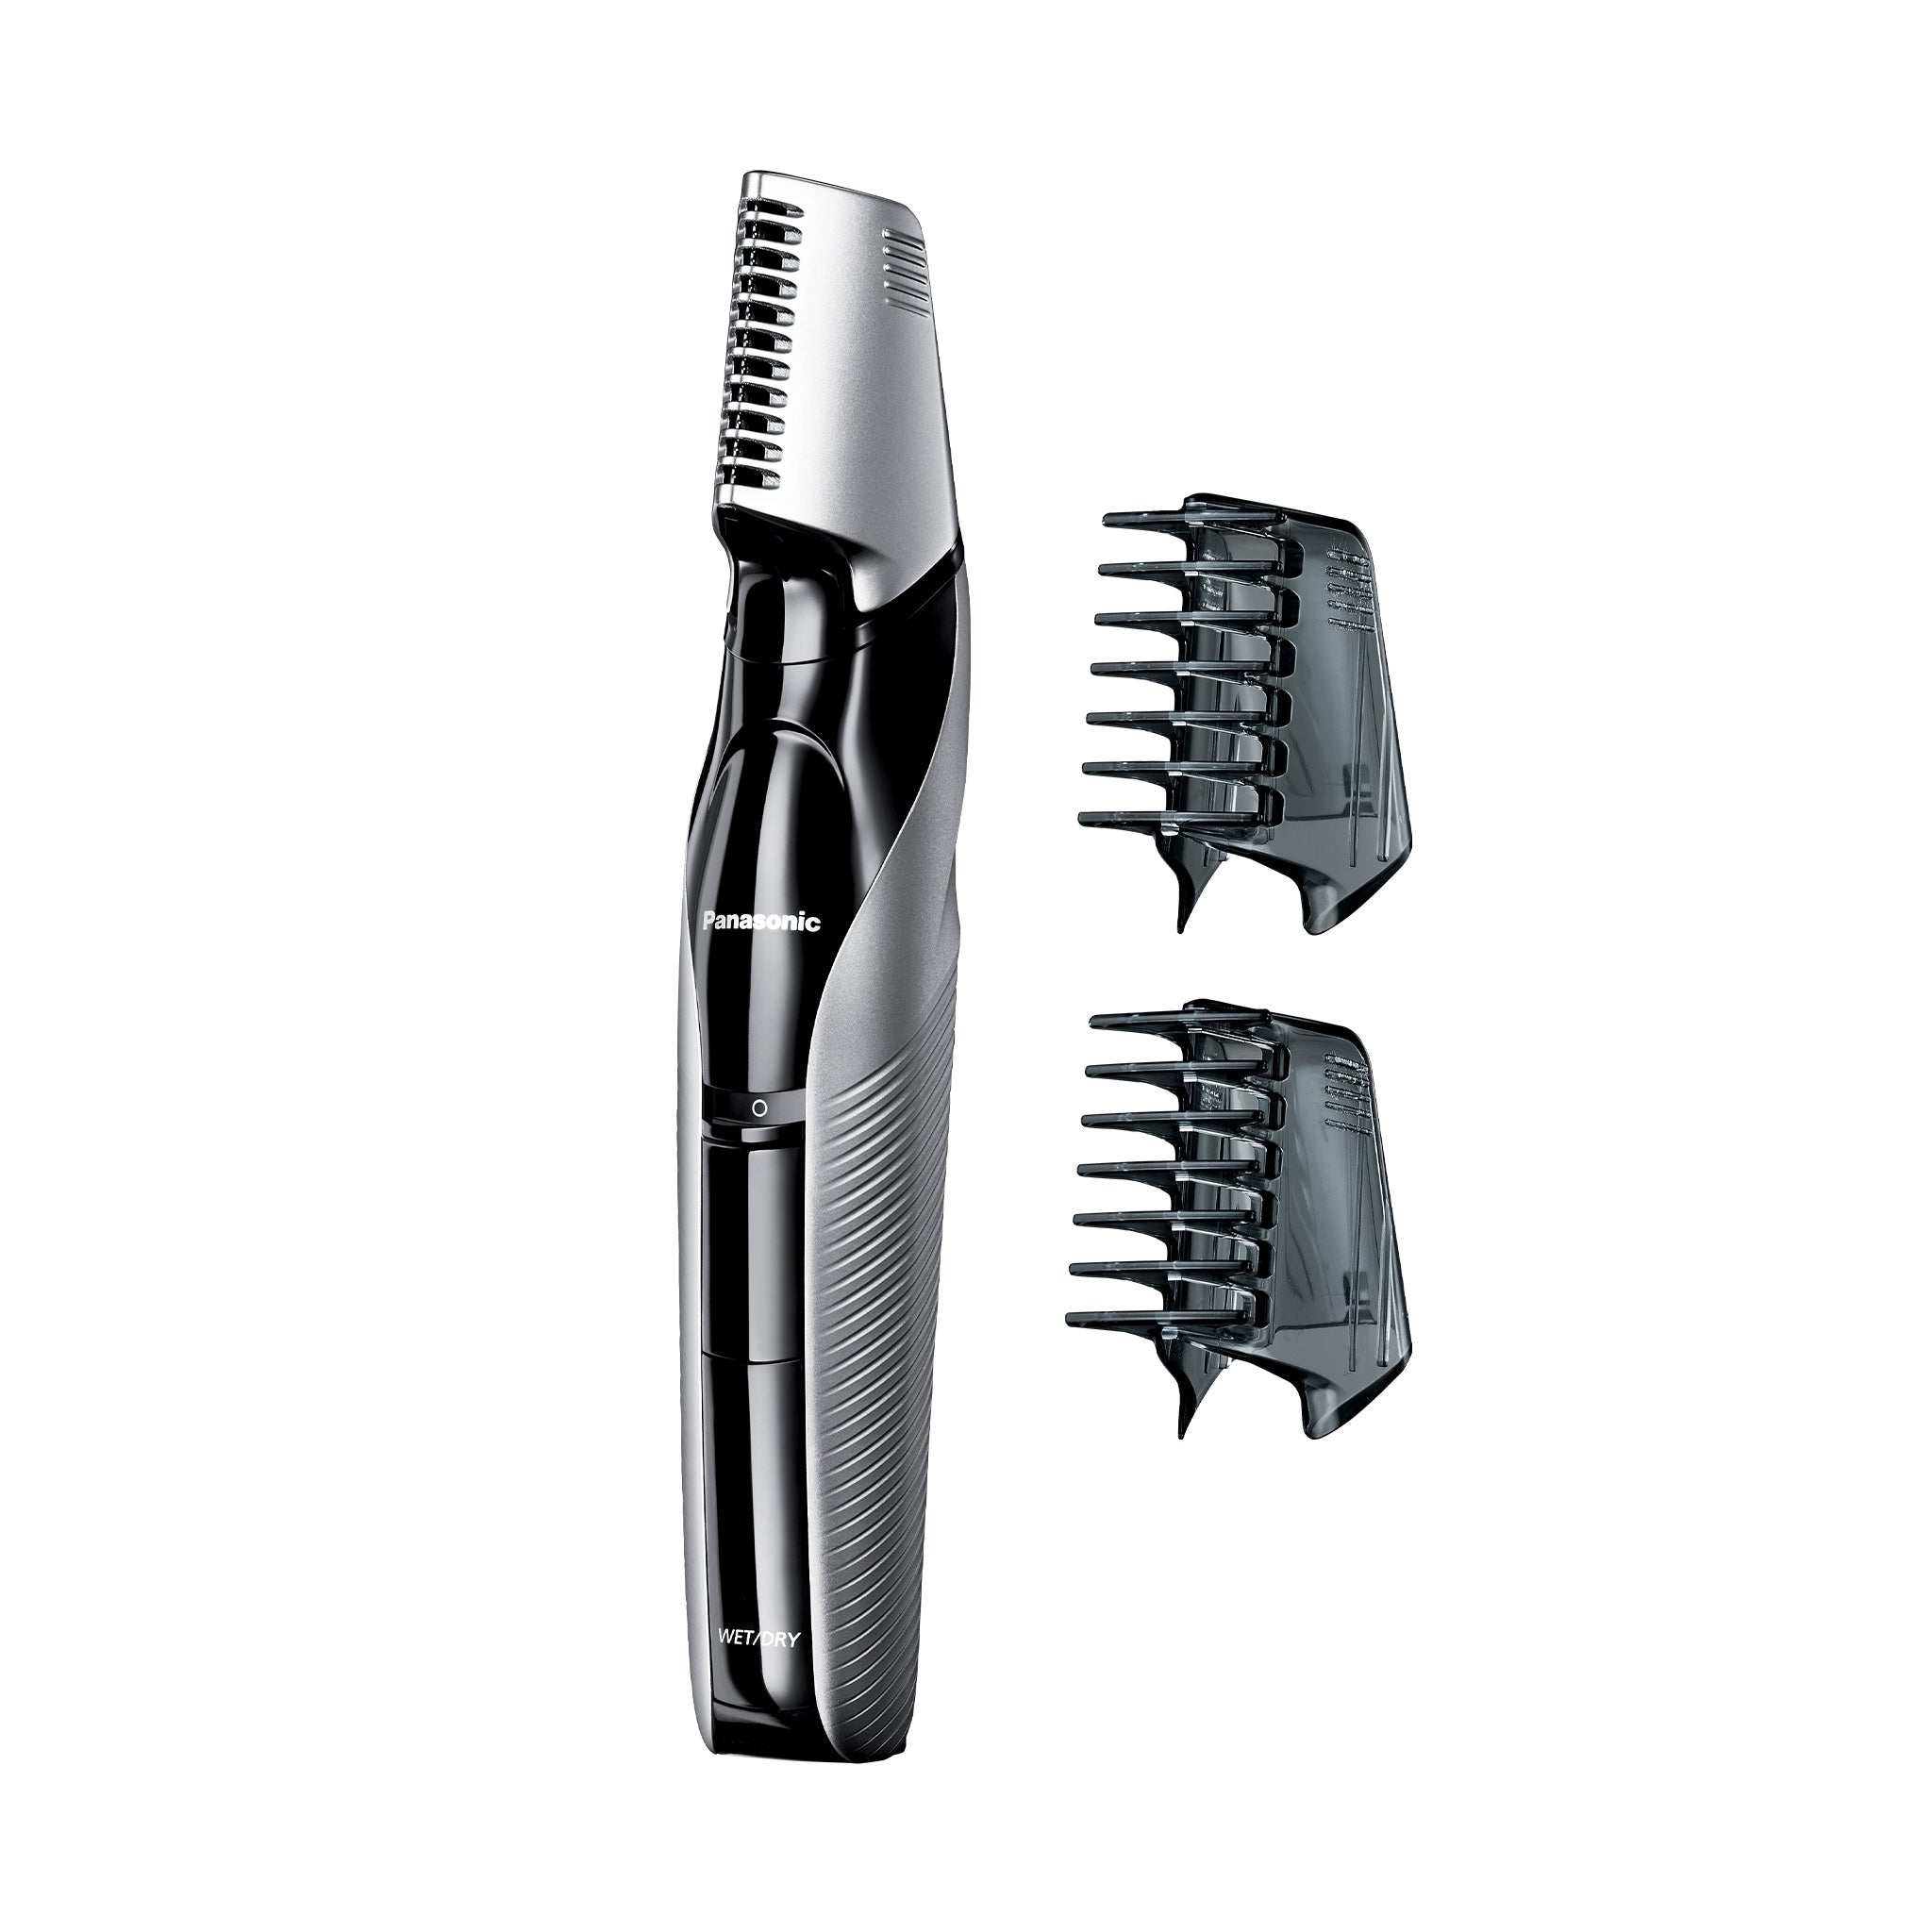 Body Hair Groomer, 3 Comb Attachments